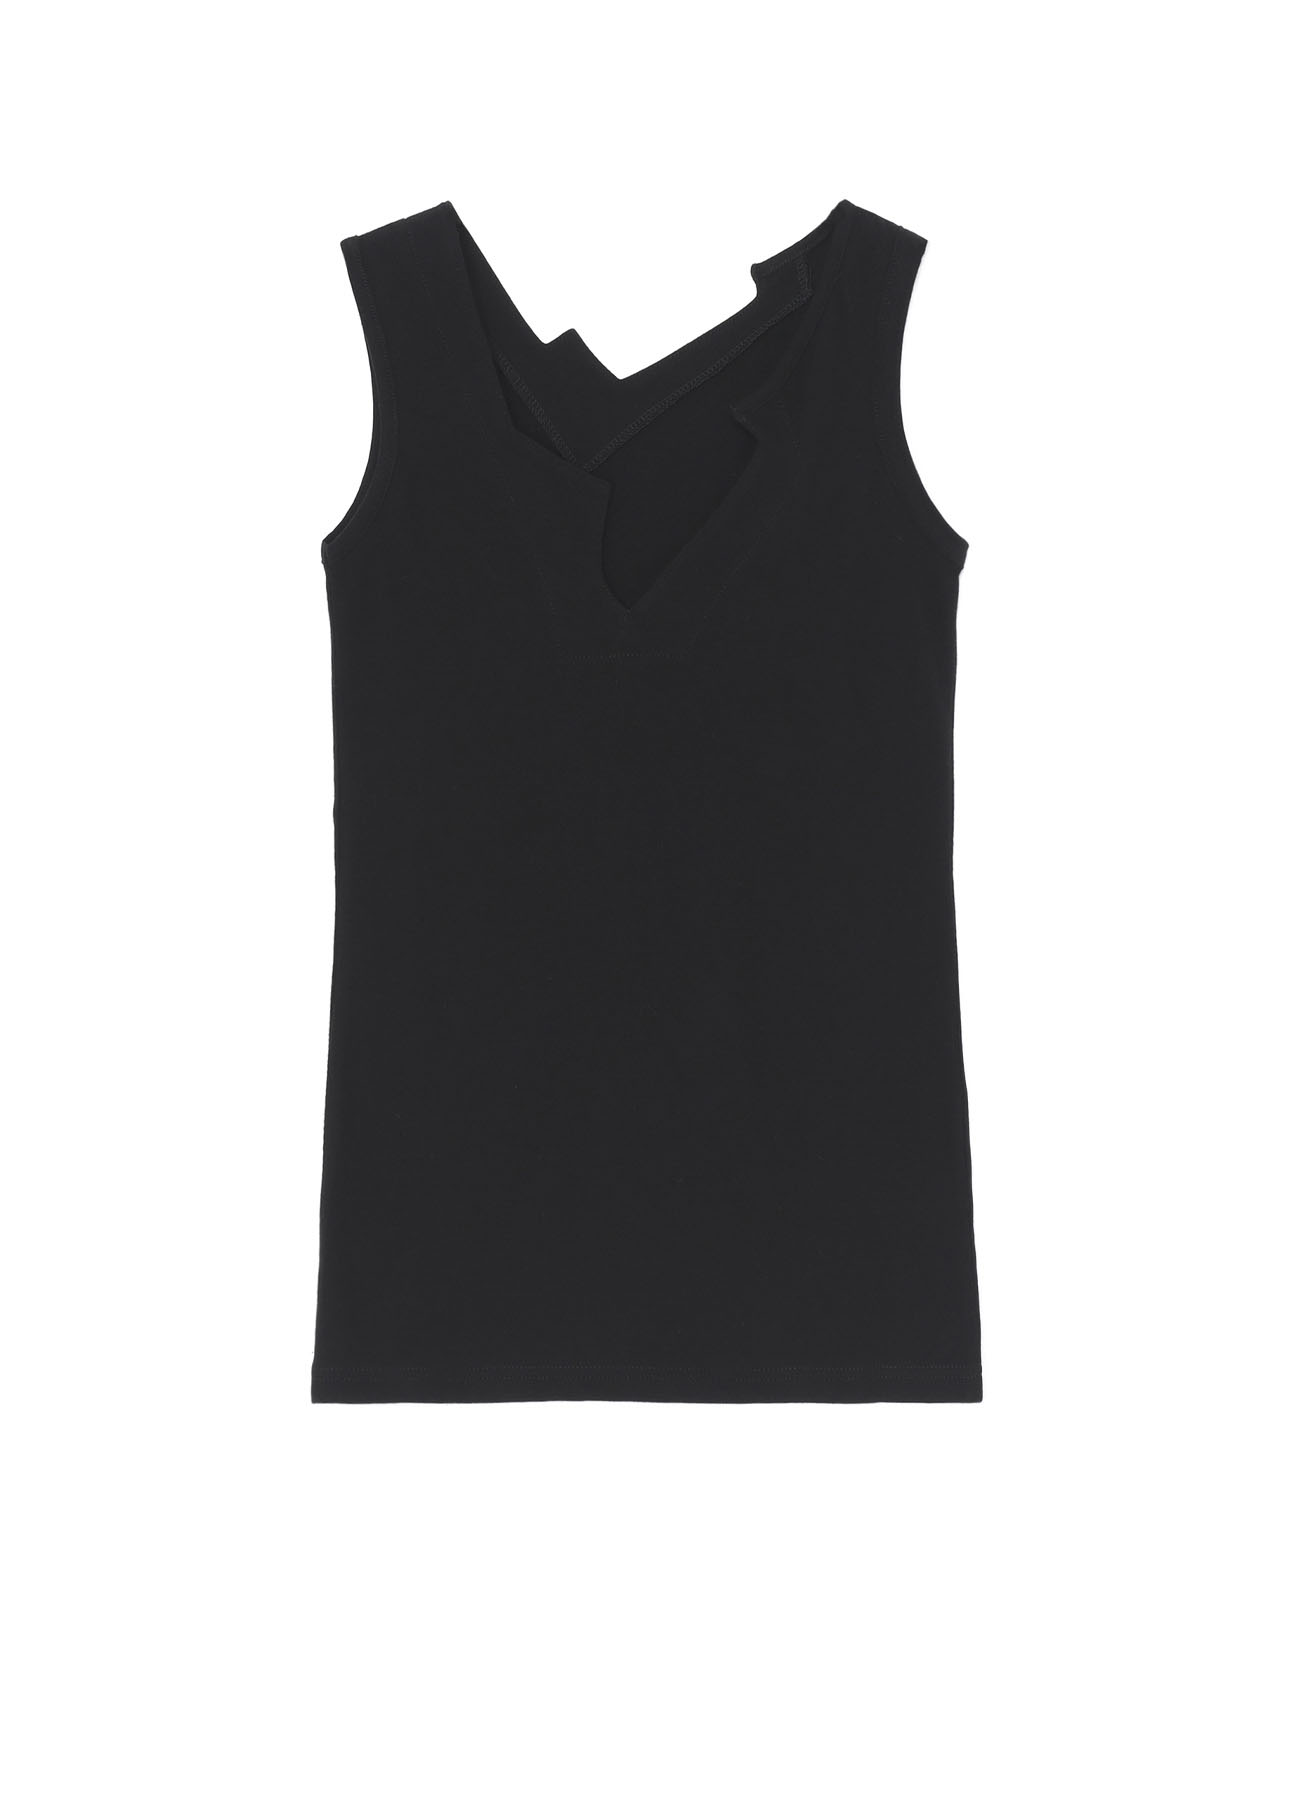 LOW TENSION SINGLE JERSEY collections ZIGZAG TANK TOP